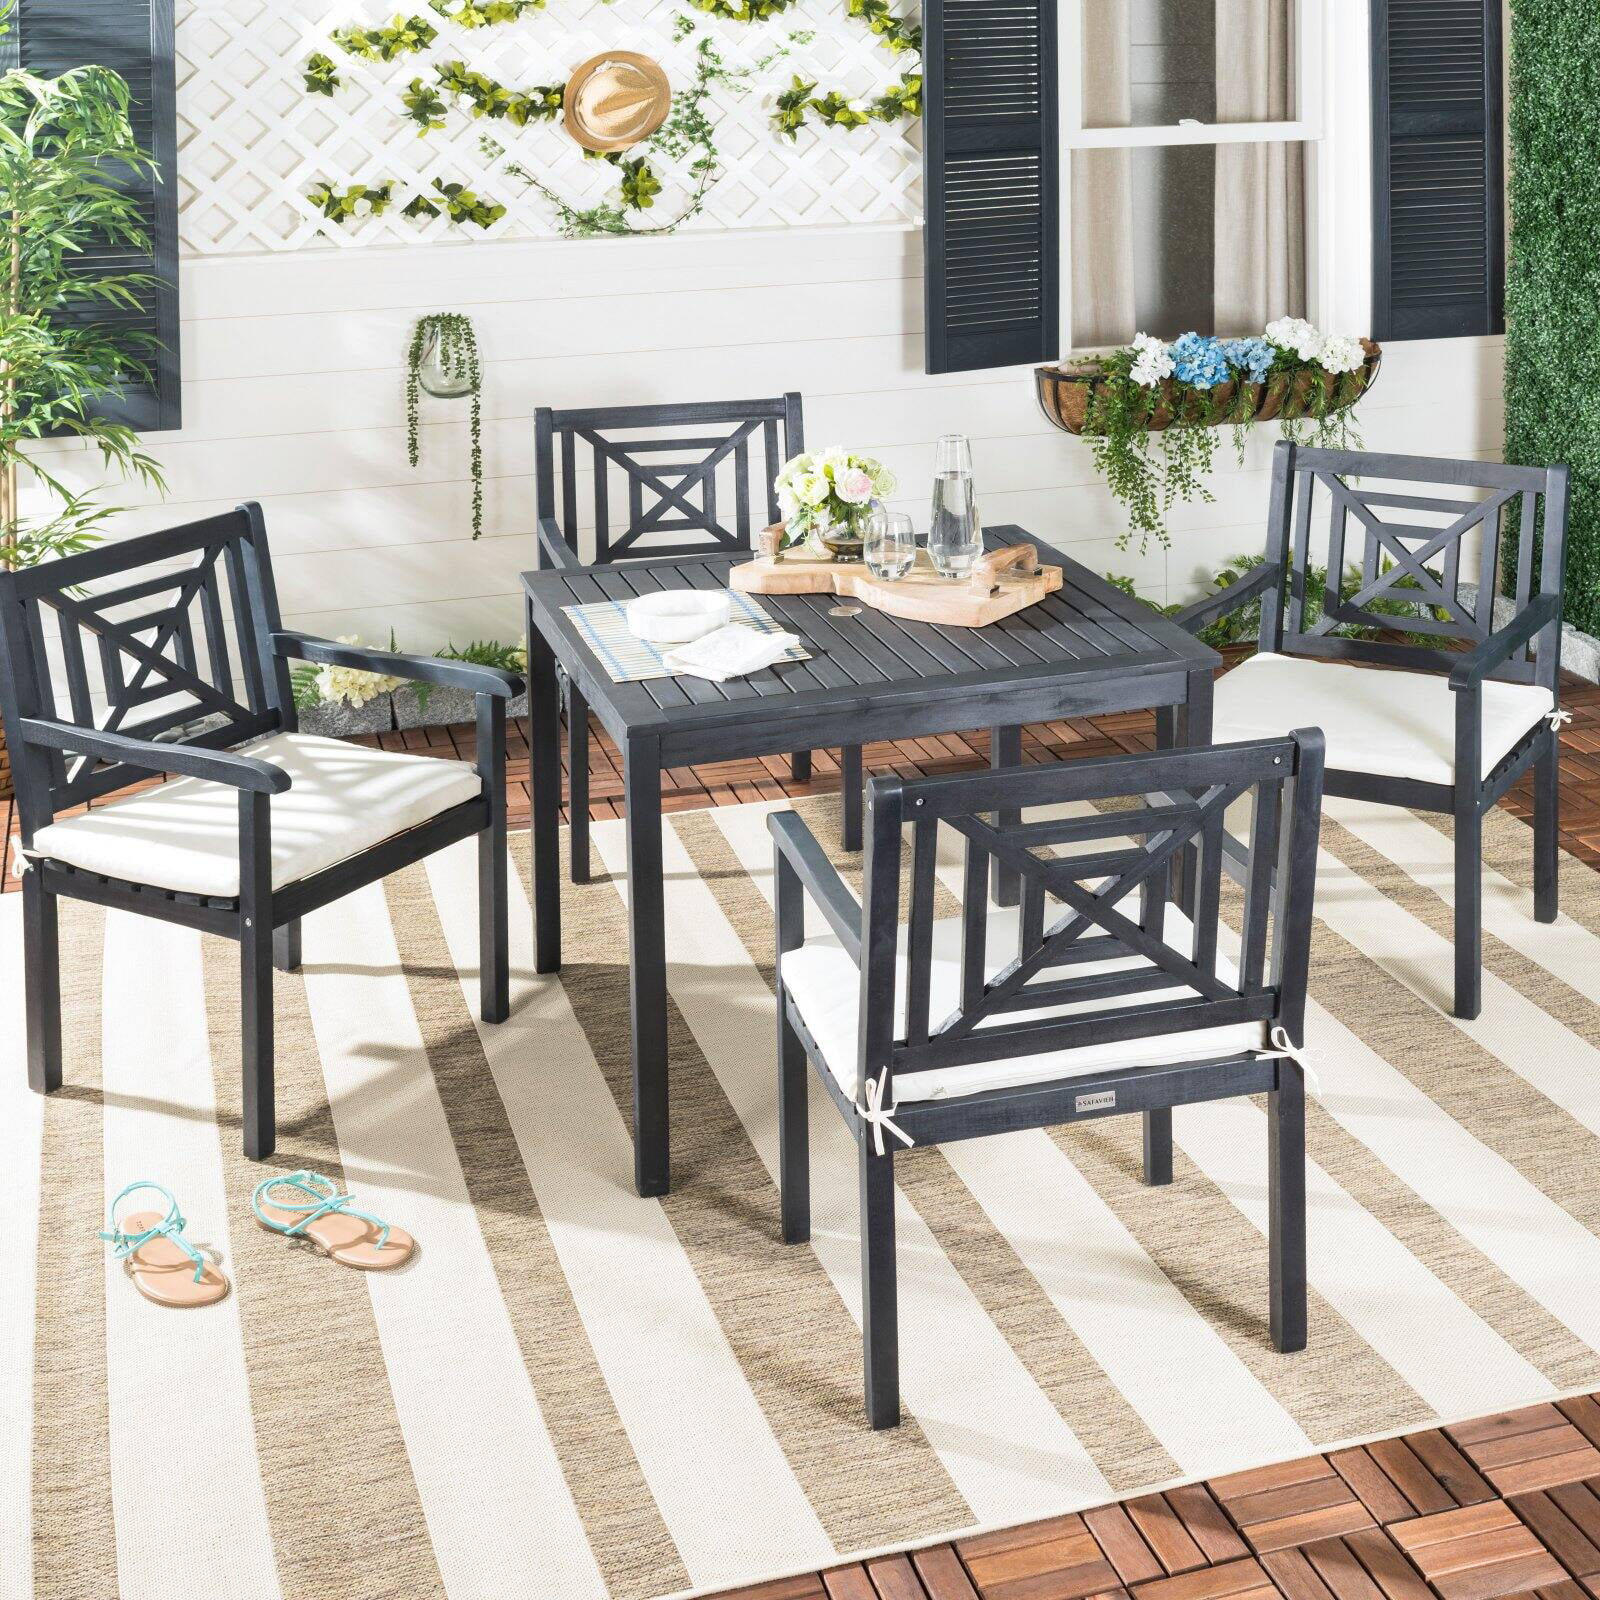 Safavieh Del Mar Outdoor Contemporary 5 Piece Dining Set with Cushion